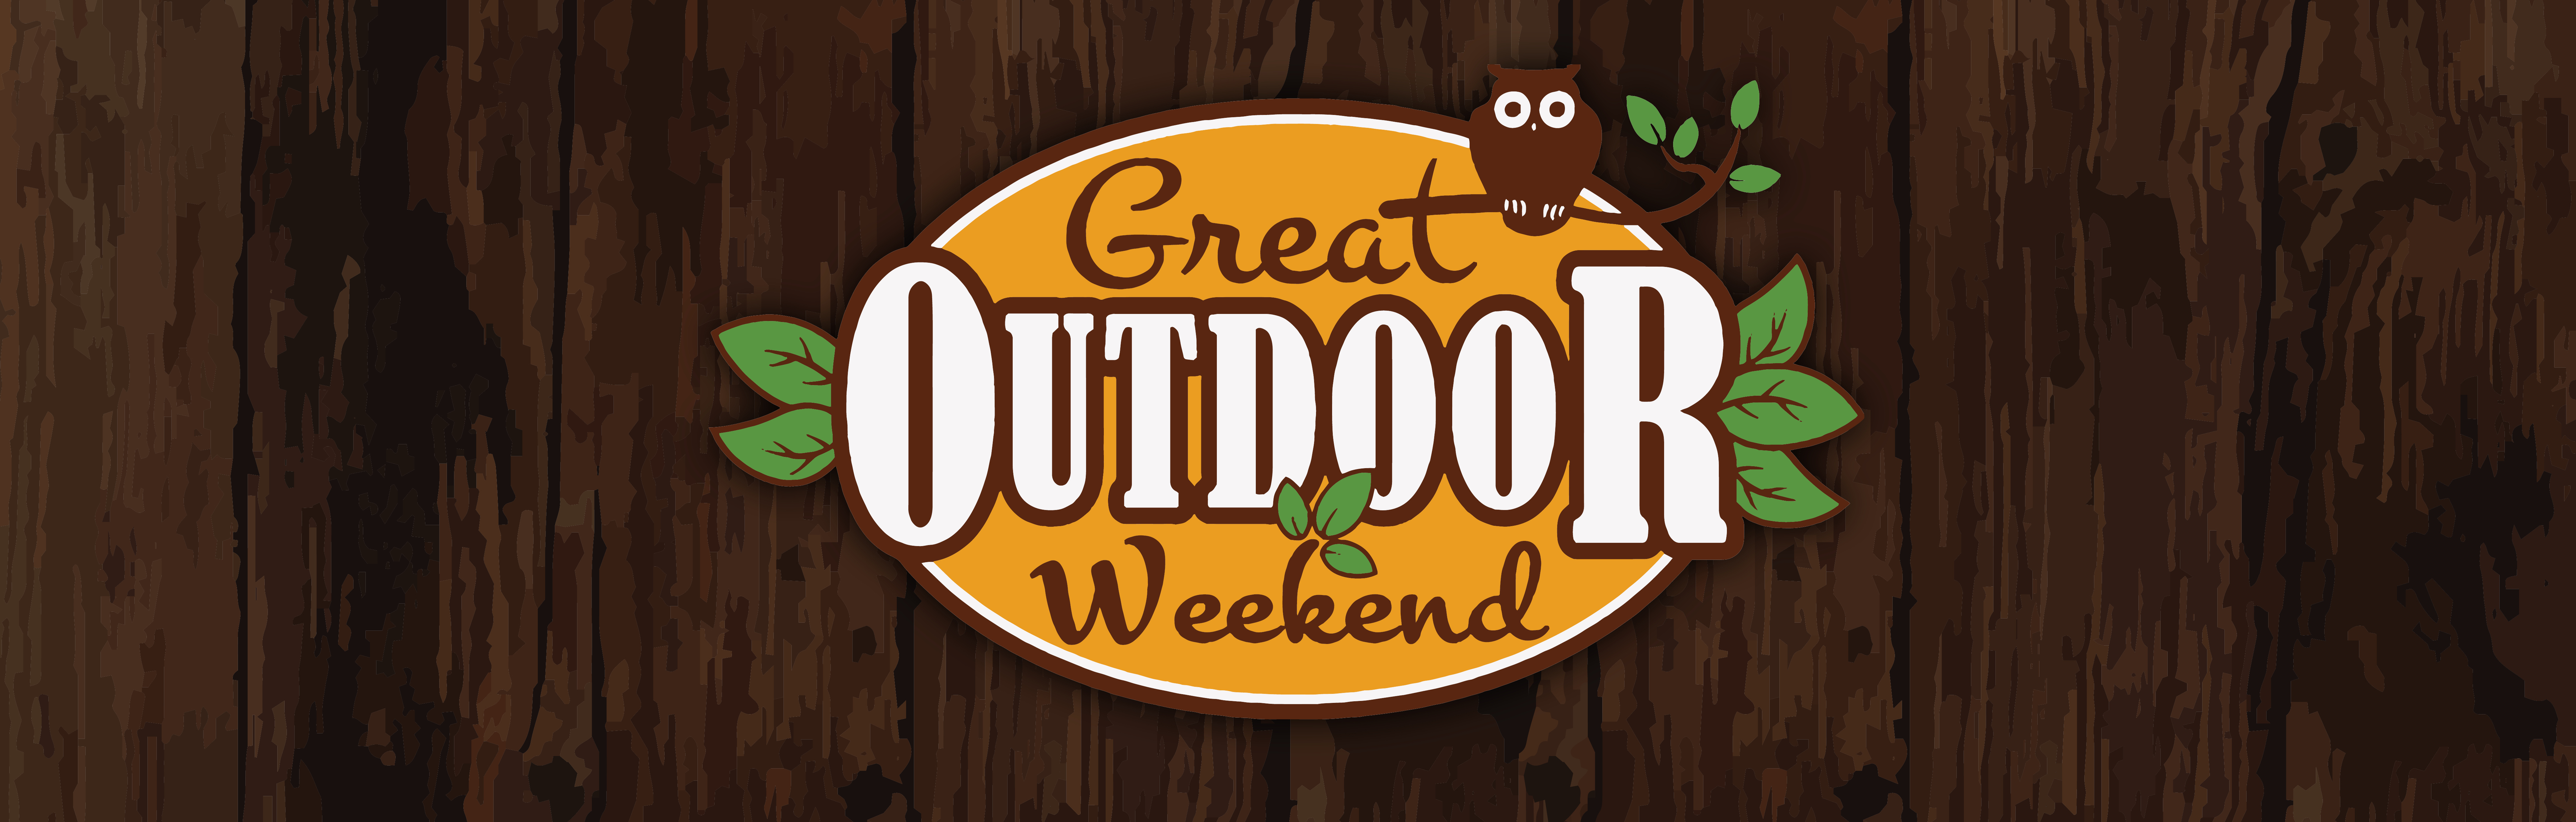 Graphic of a dark wood background with Great Outdoor Weekend logo on top